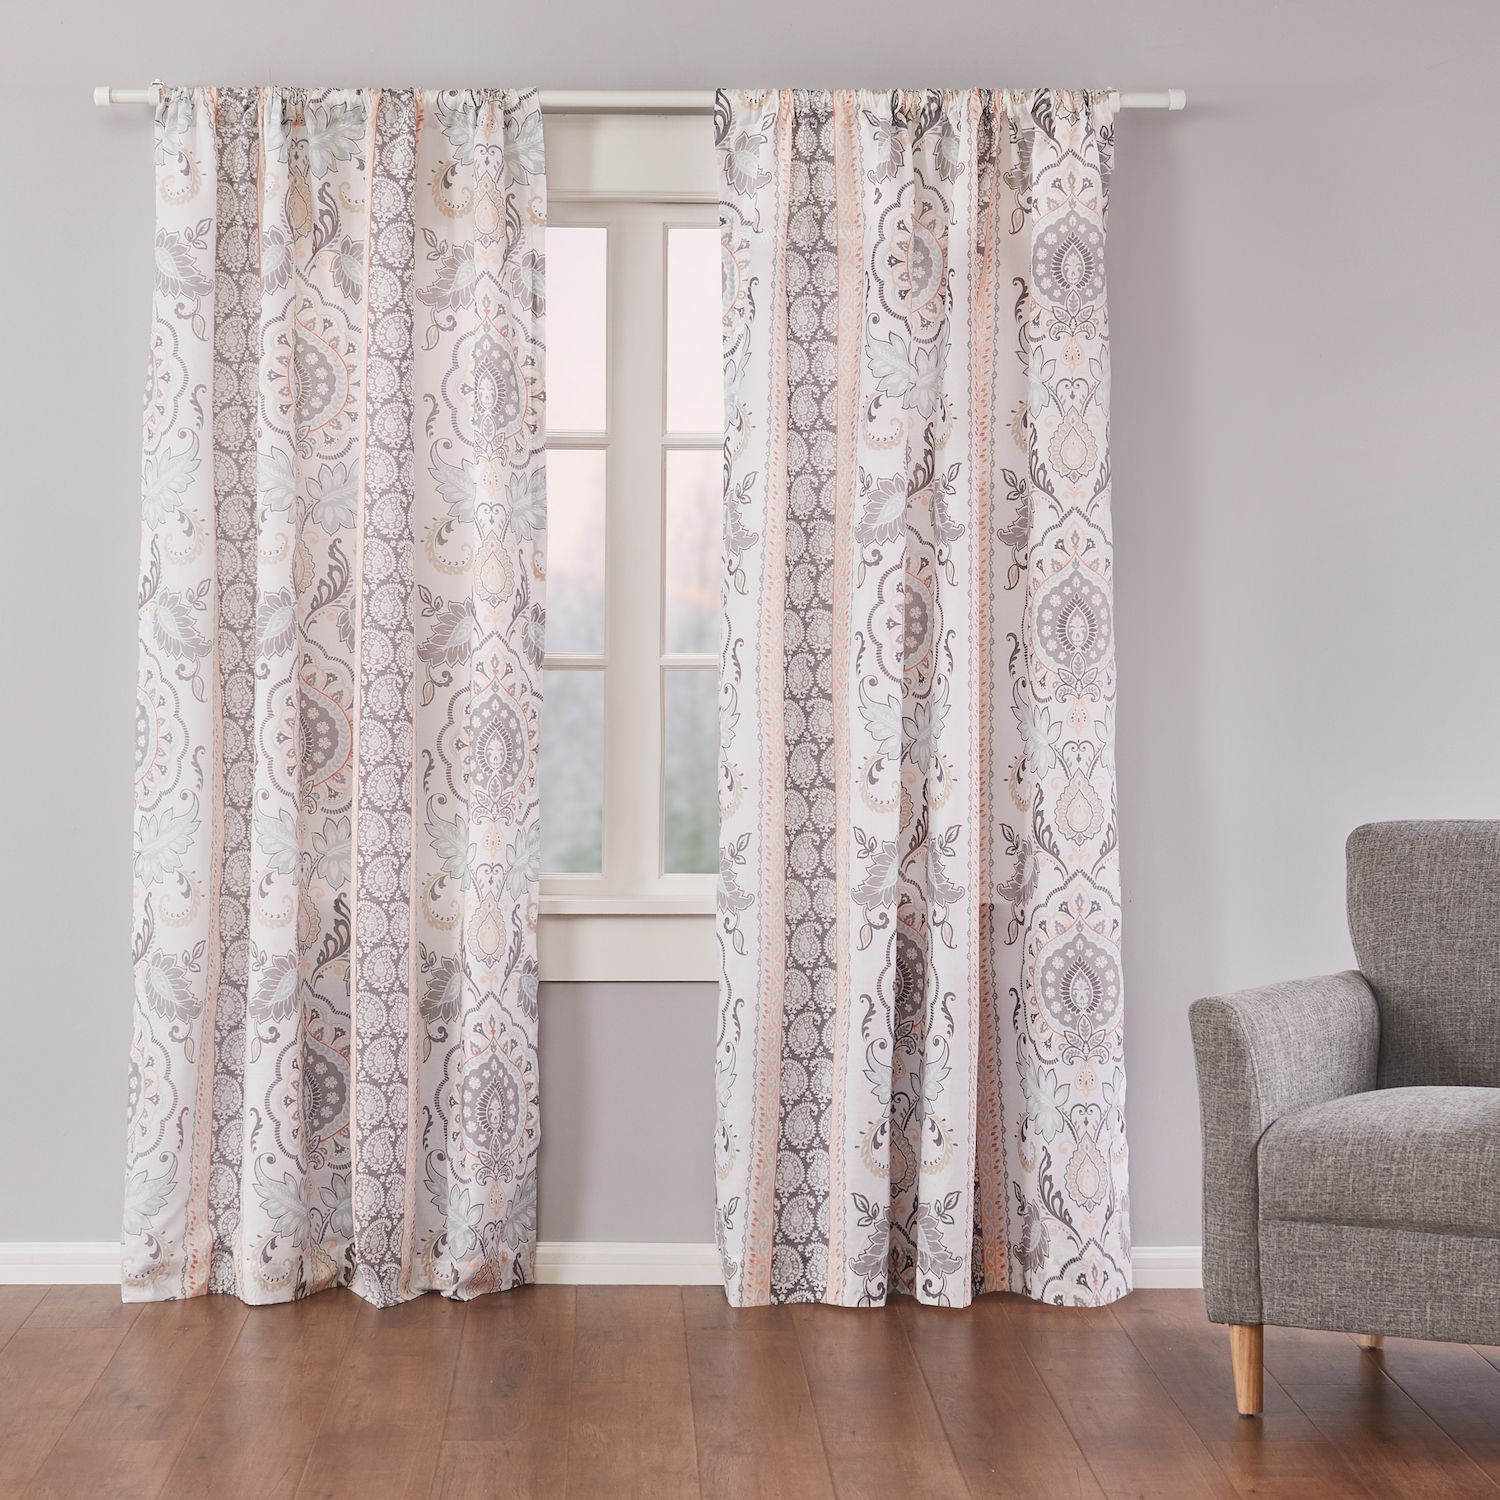 Image for Levtex Home 2-pack Darcy Window Curtain Set at Kohl's.